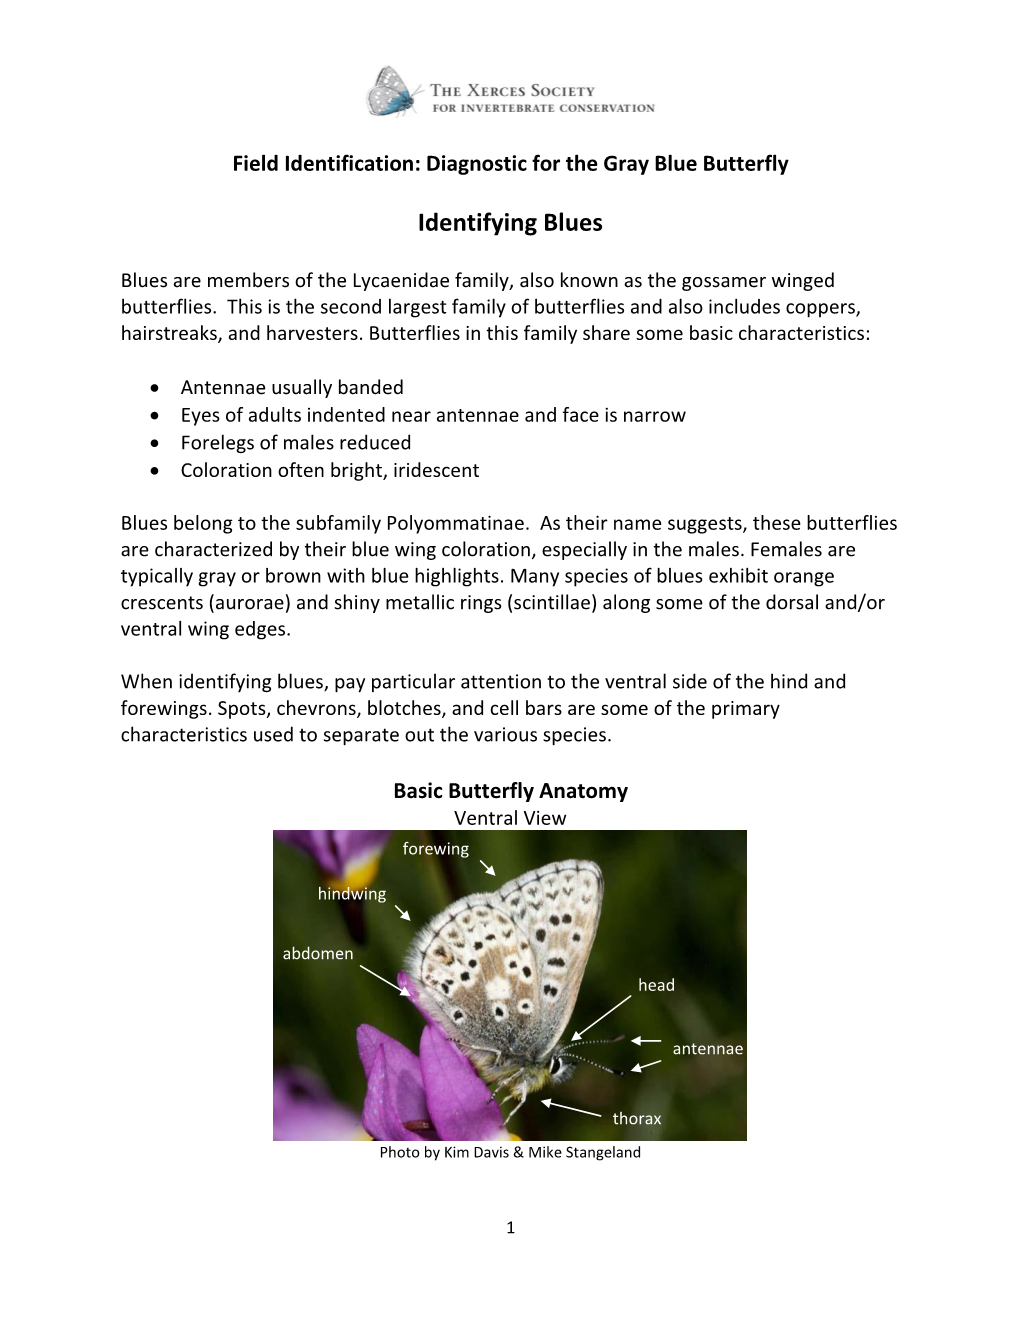 Gray Blue Butterfly Field Identification: Quick Reference Guide